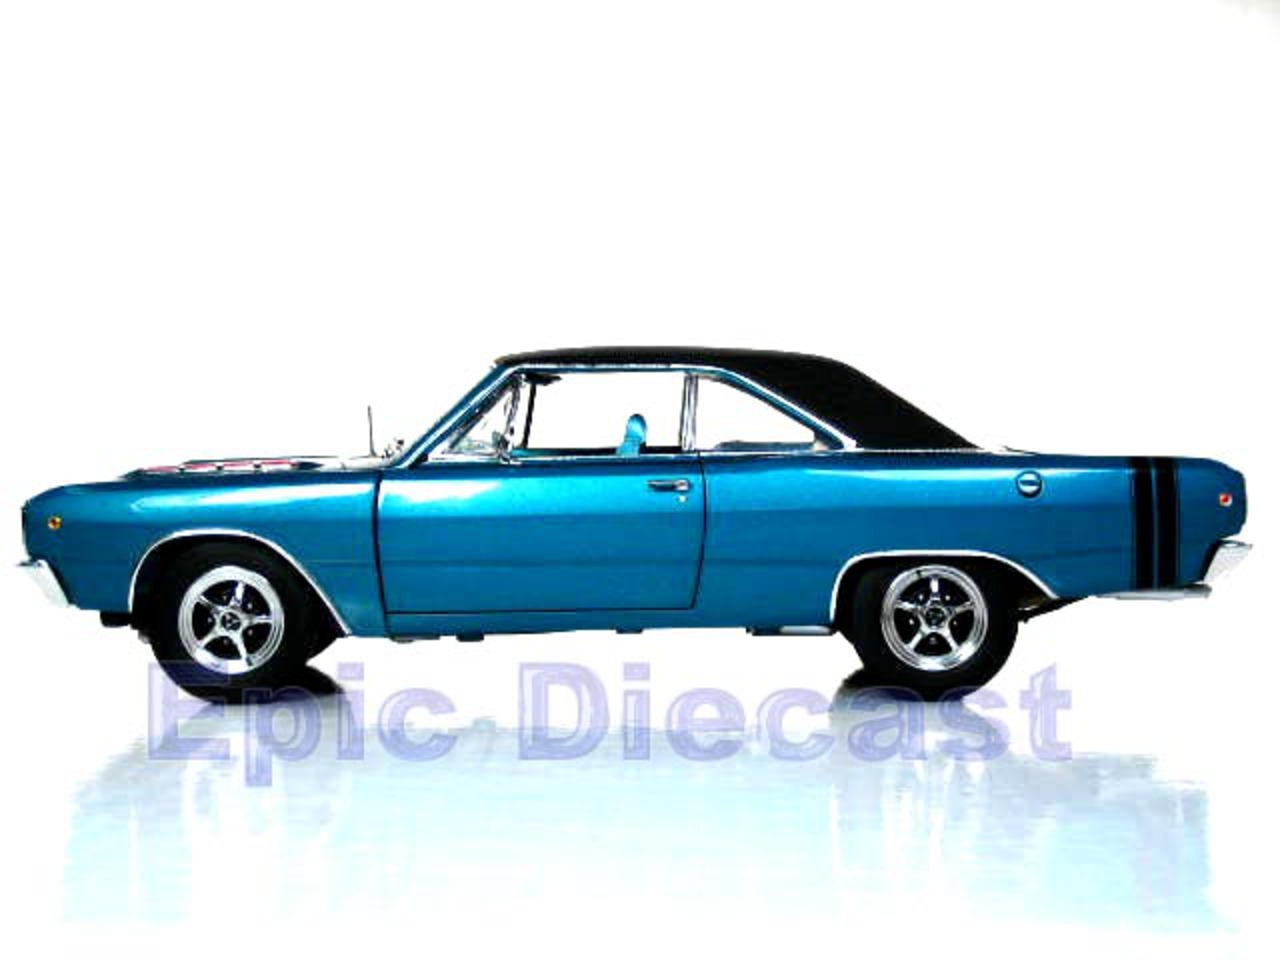 1968 Dodge Dart 340 1:18 scale diecast car from Highway 61 in Bright Blue